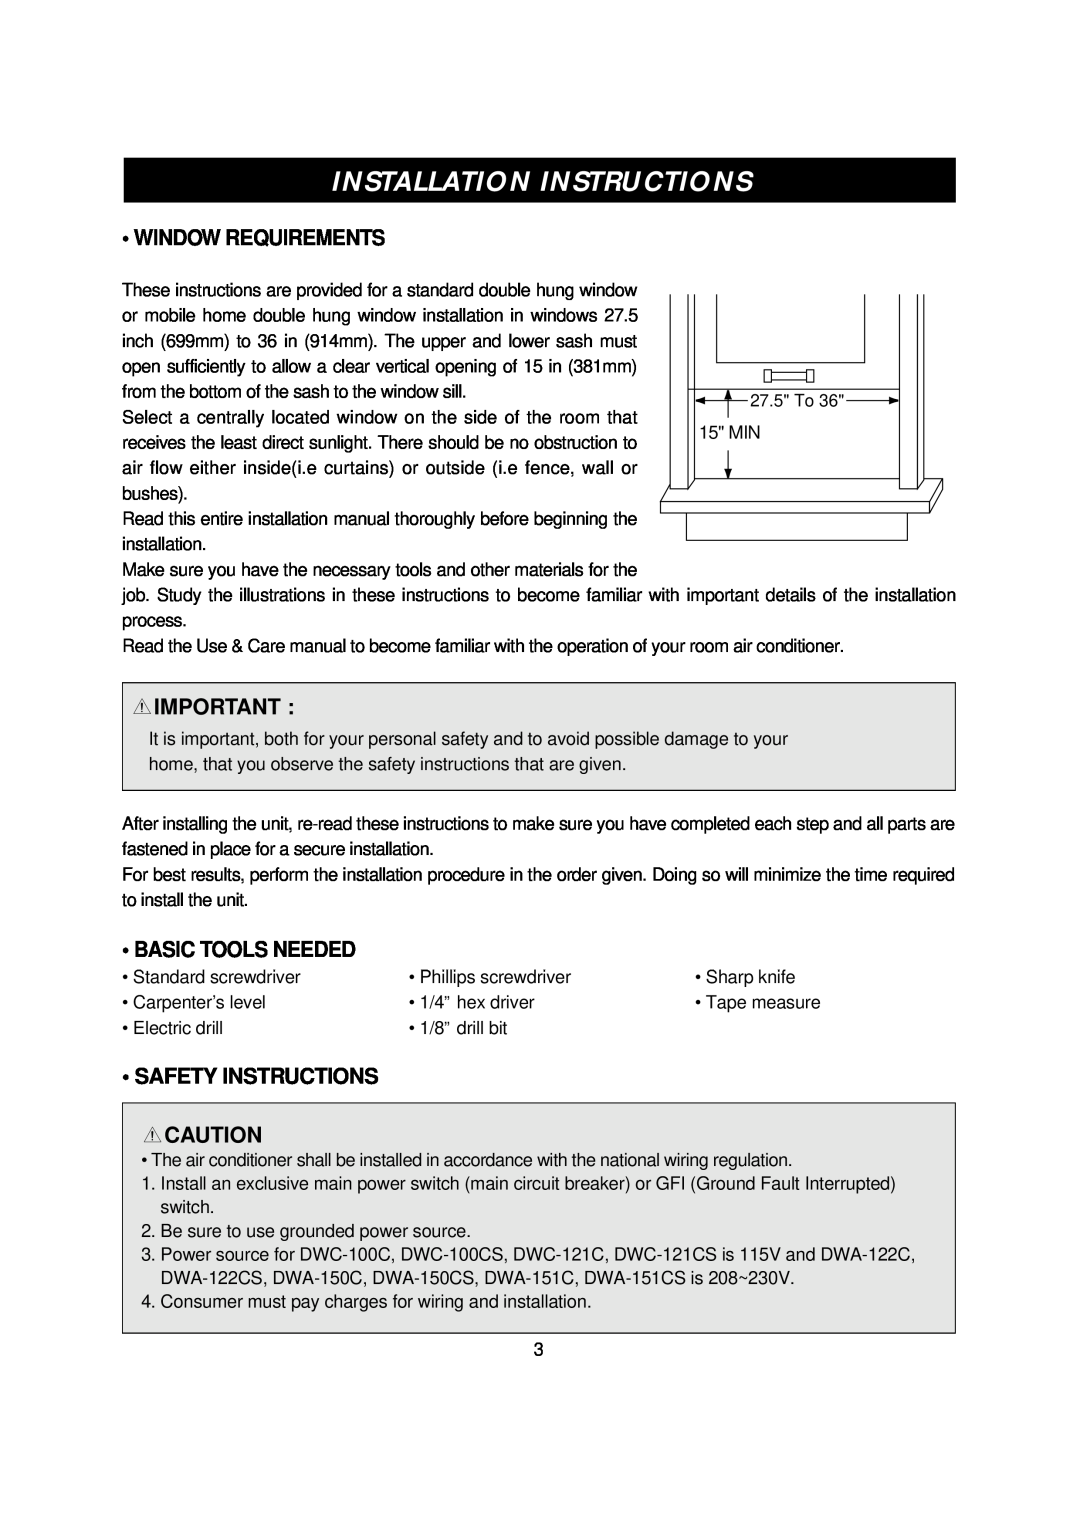 Daewoo DWA-150CS, DWC-100CS manual Installation Instructions, Window Requirements, Basic Tools Needed, Safety Instructions 